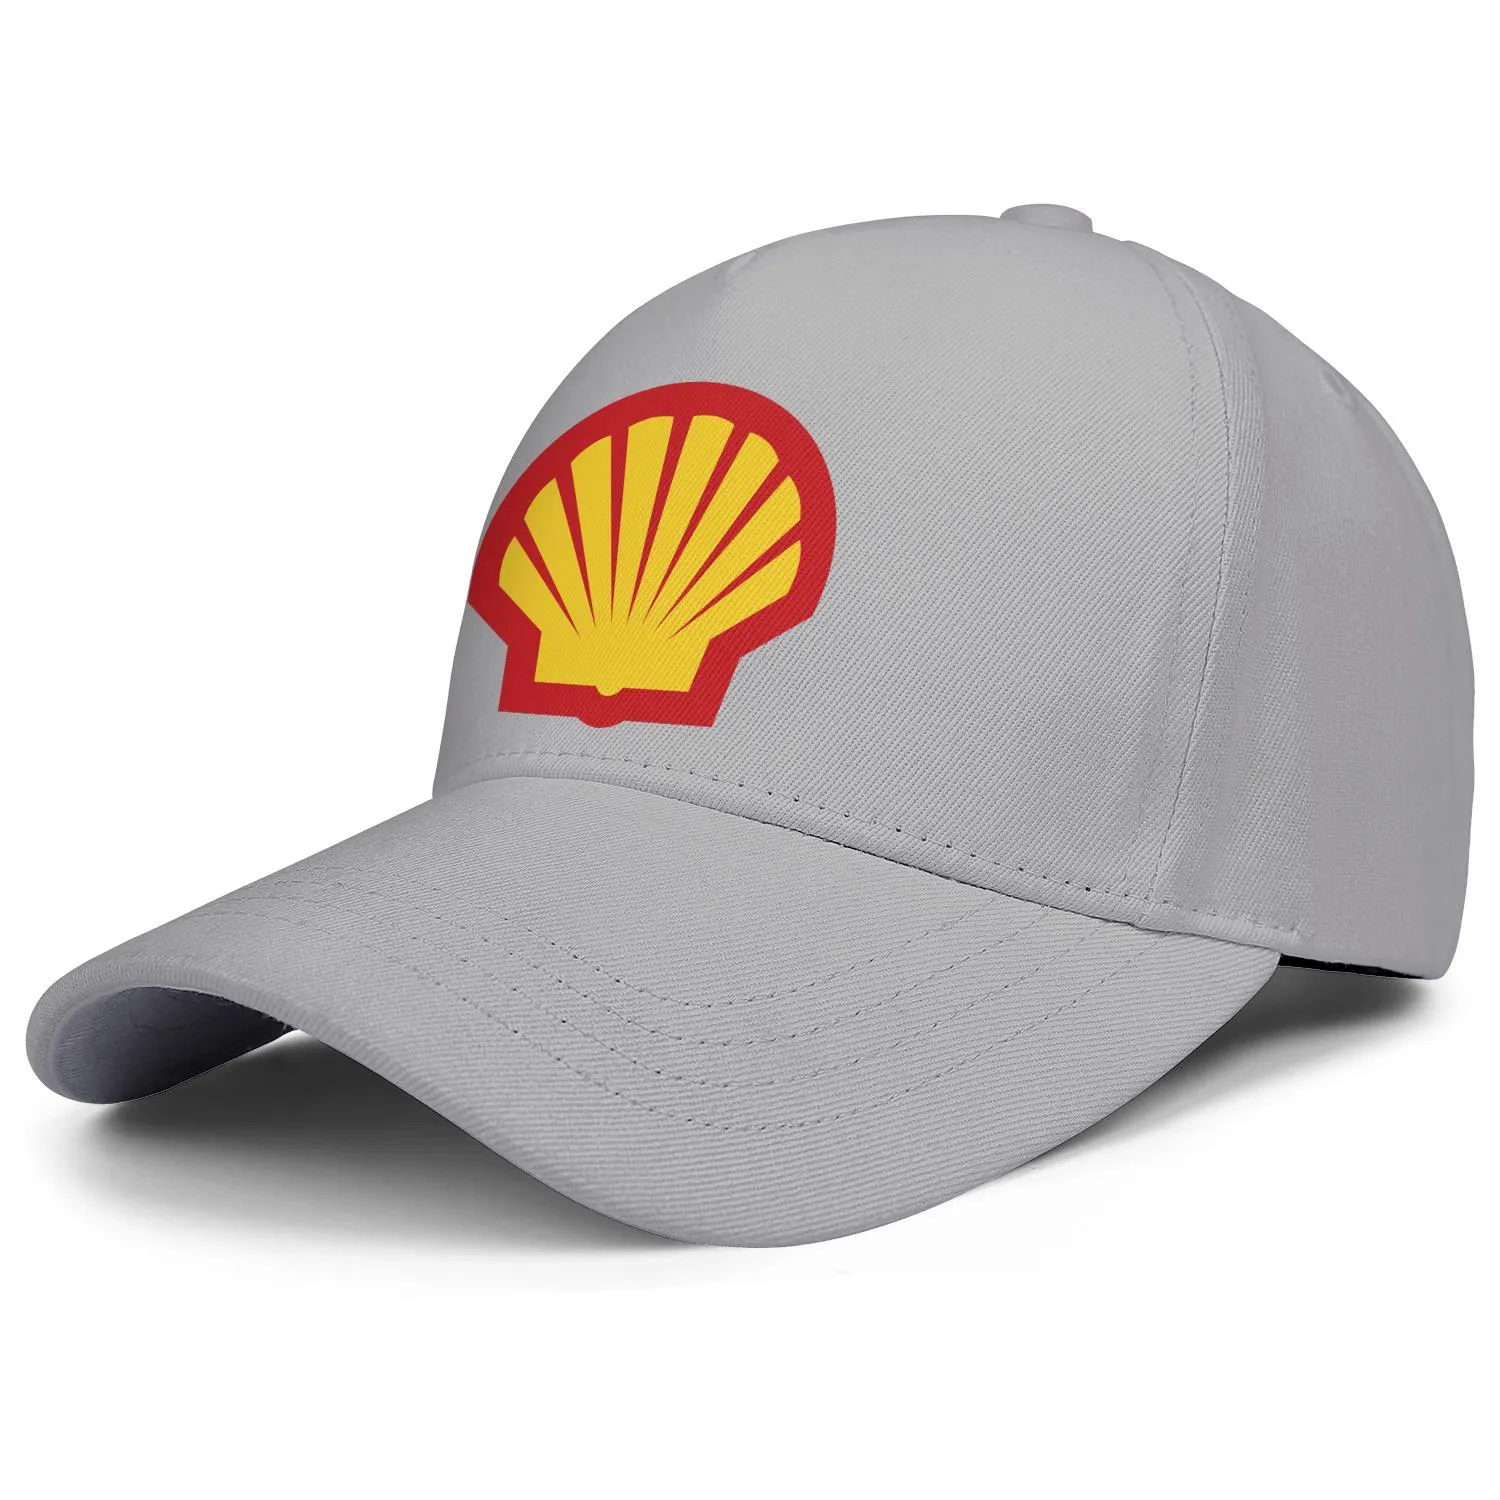 Shell gasoline gas station logo mens and women adjustable trucker cap fitted vintage cute baseballhats locator Gasoline symbo6725151